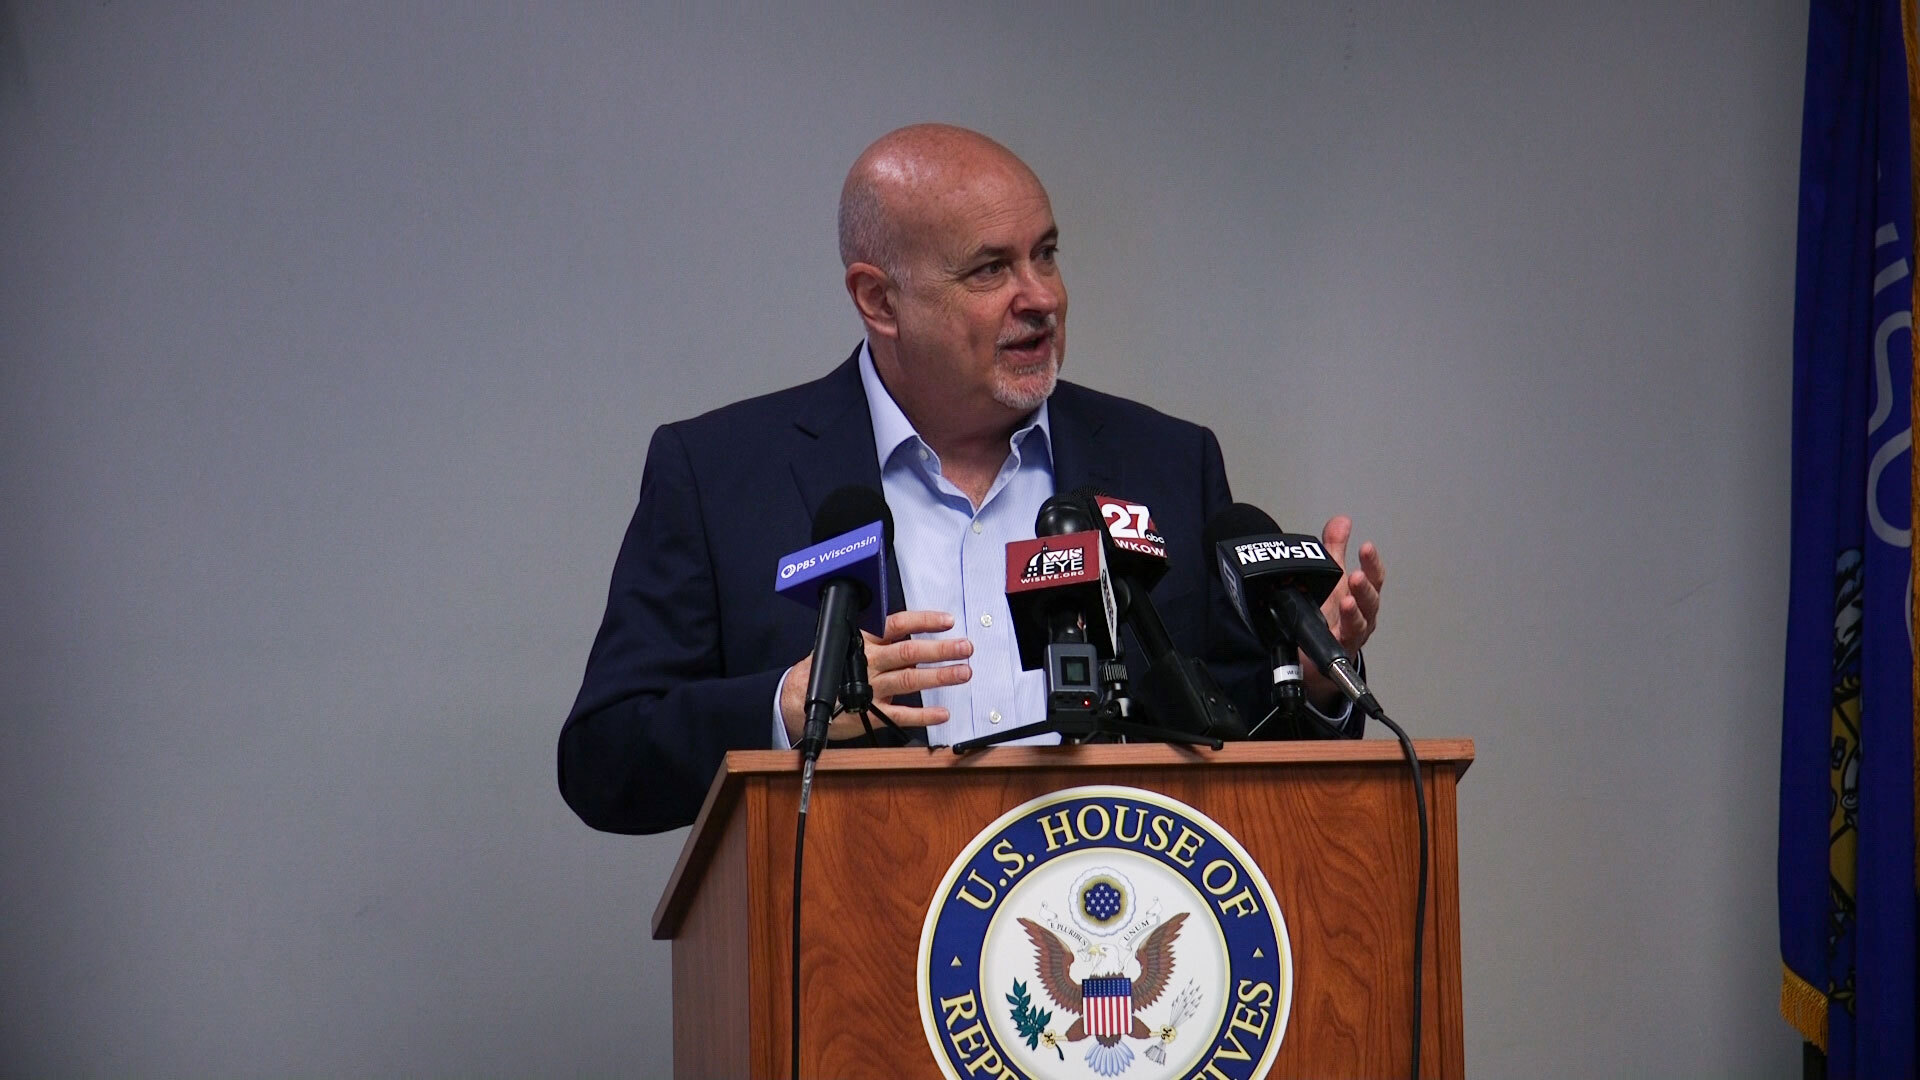 Mark Pocan speaks at a podium with a U.S. House of Representatives seal.